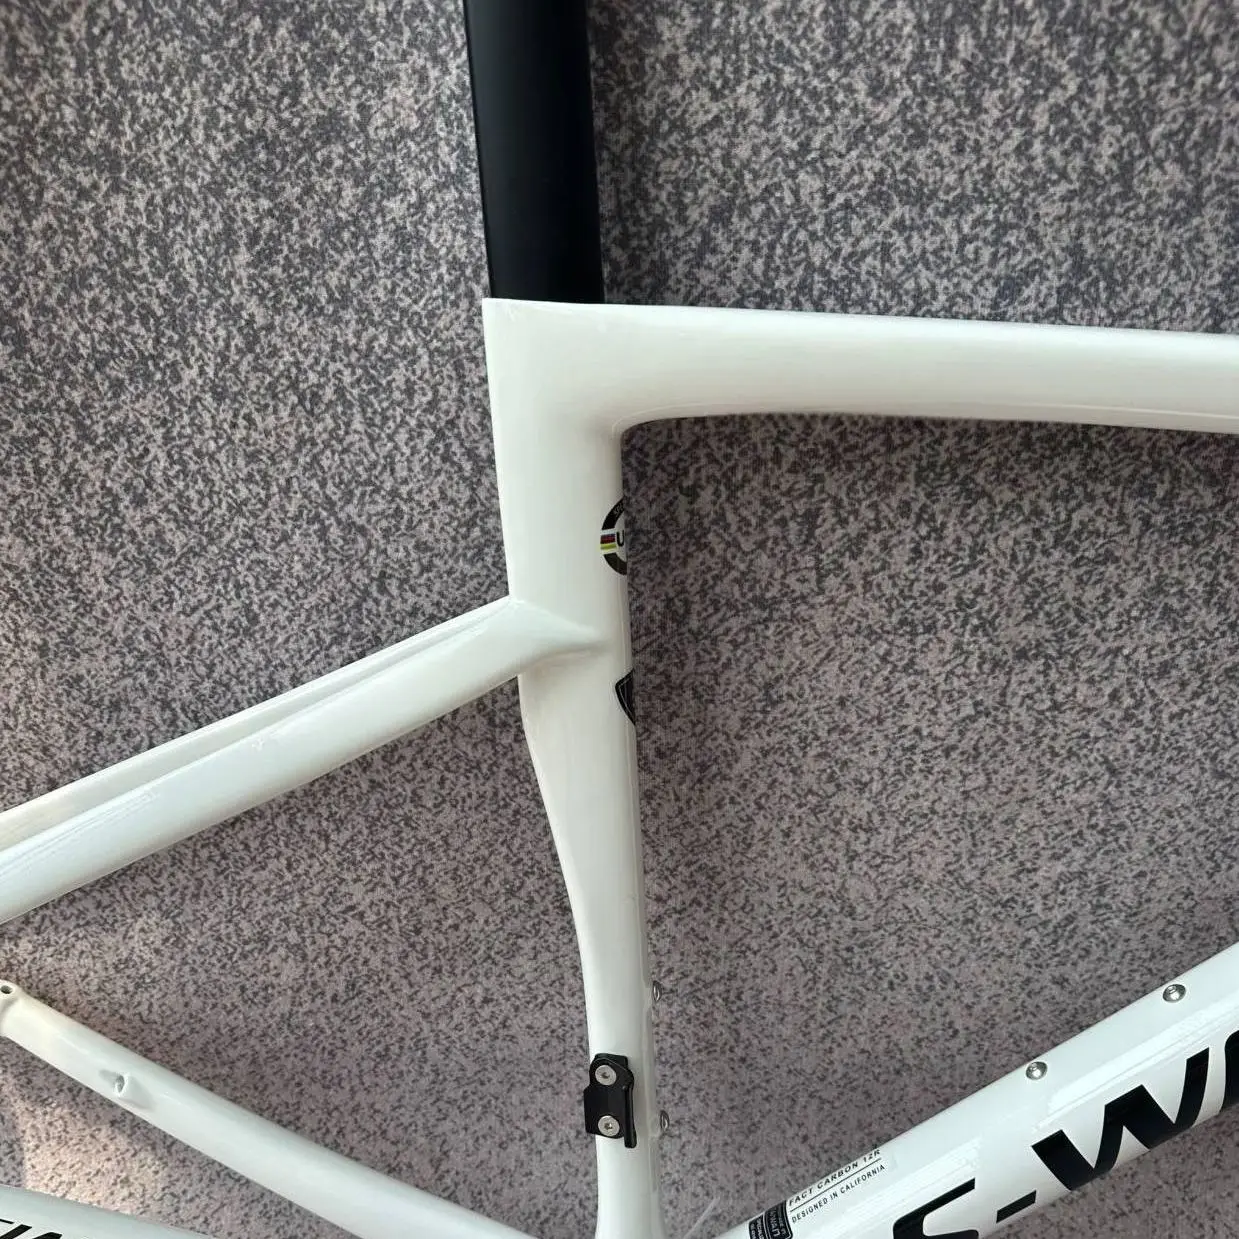 

SL7 White Carbon Bike Frame 2023 Road Bike Frame T1100 Carbon 1:1 Bicycle Frame Made in Taiwan Contact us for more discounts!